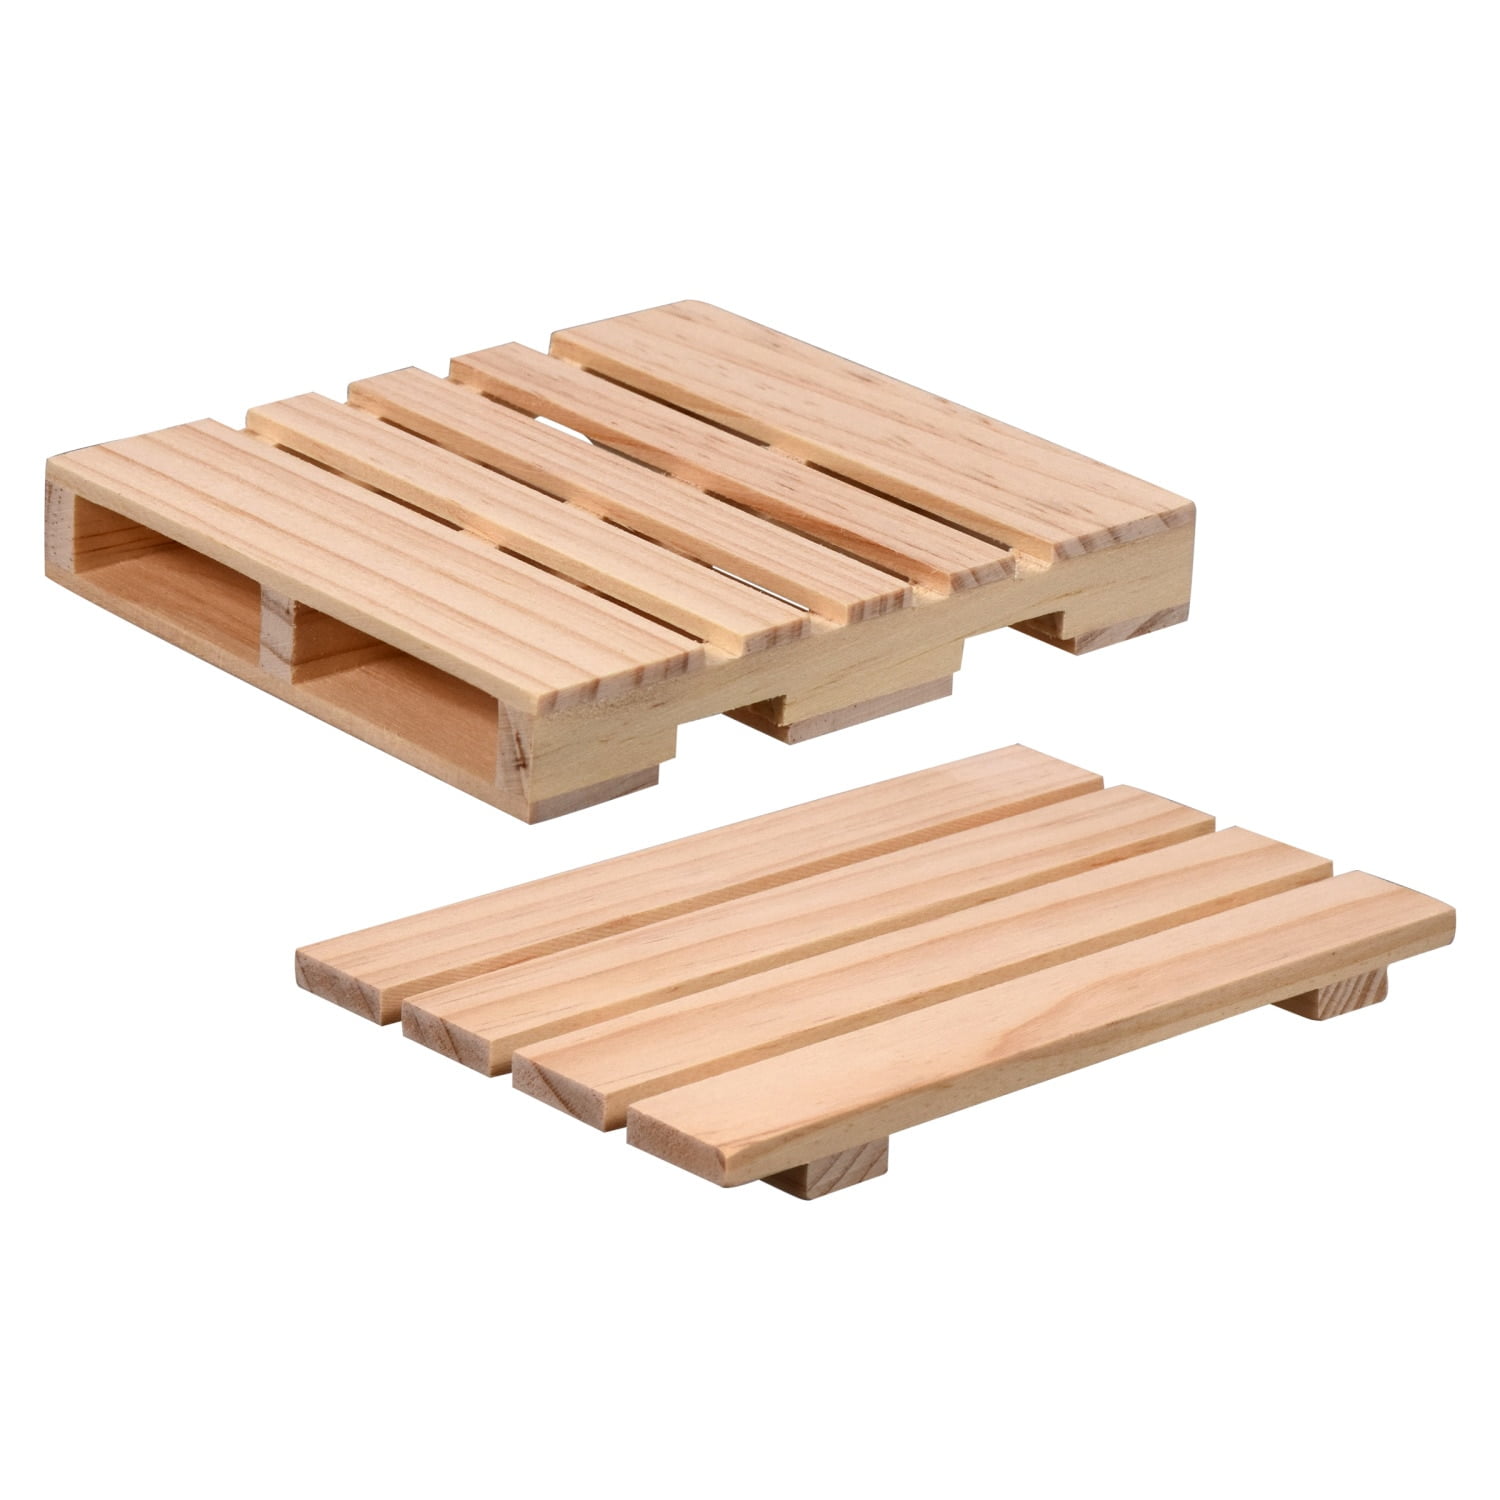 Square Wood Pallets, 6.1 x4 in. - 6 Pack - Walmart.com